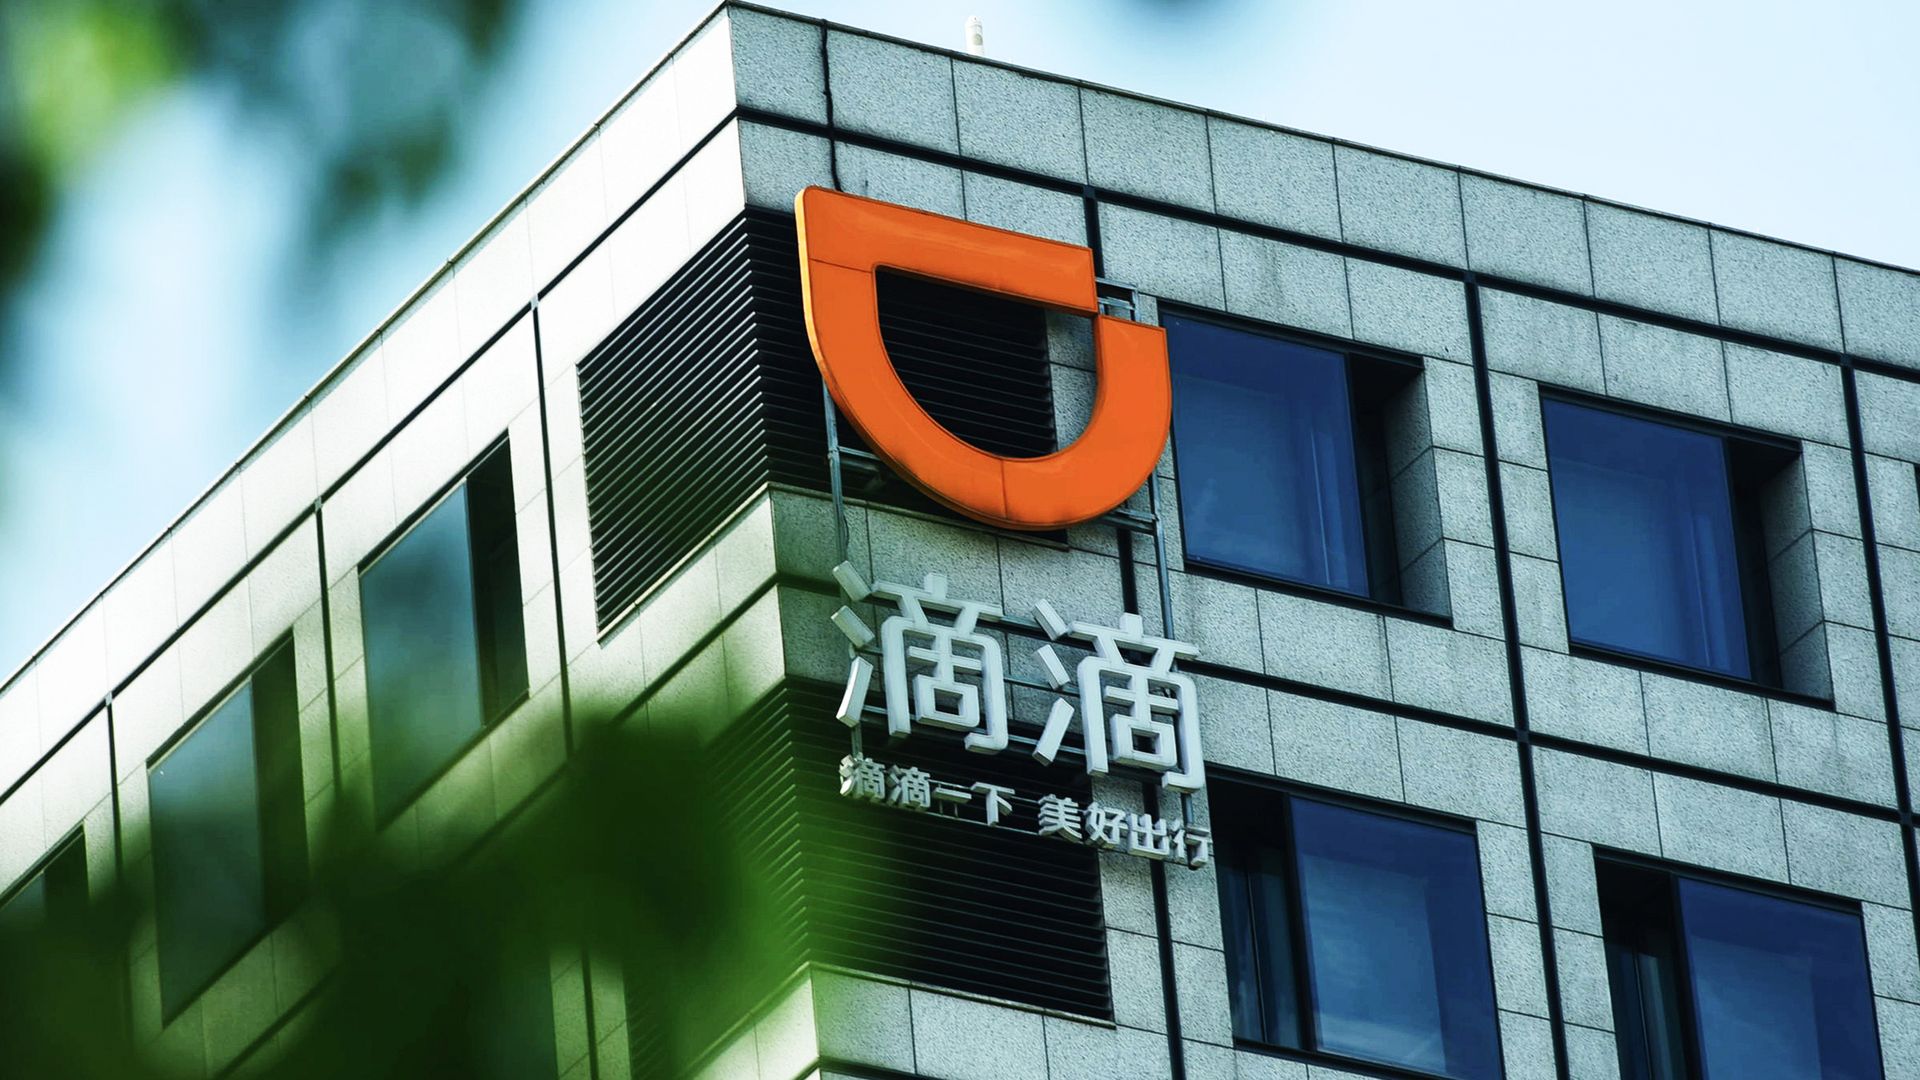 logo of Didi Chuxing displayed on a building in Hangzhou in China's eastern Zhejiang province